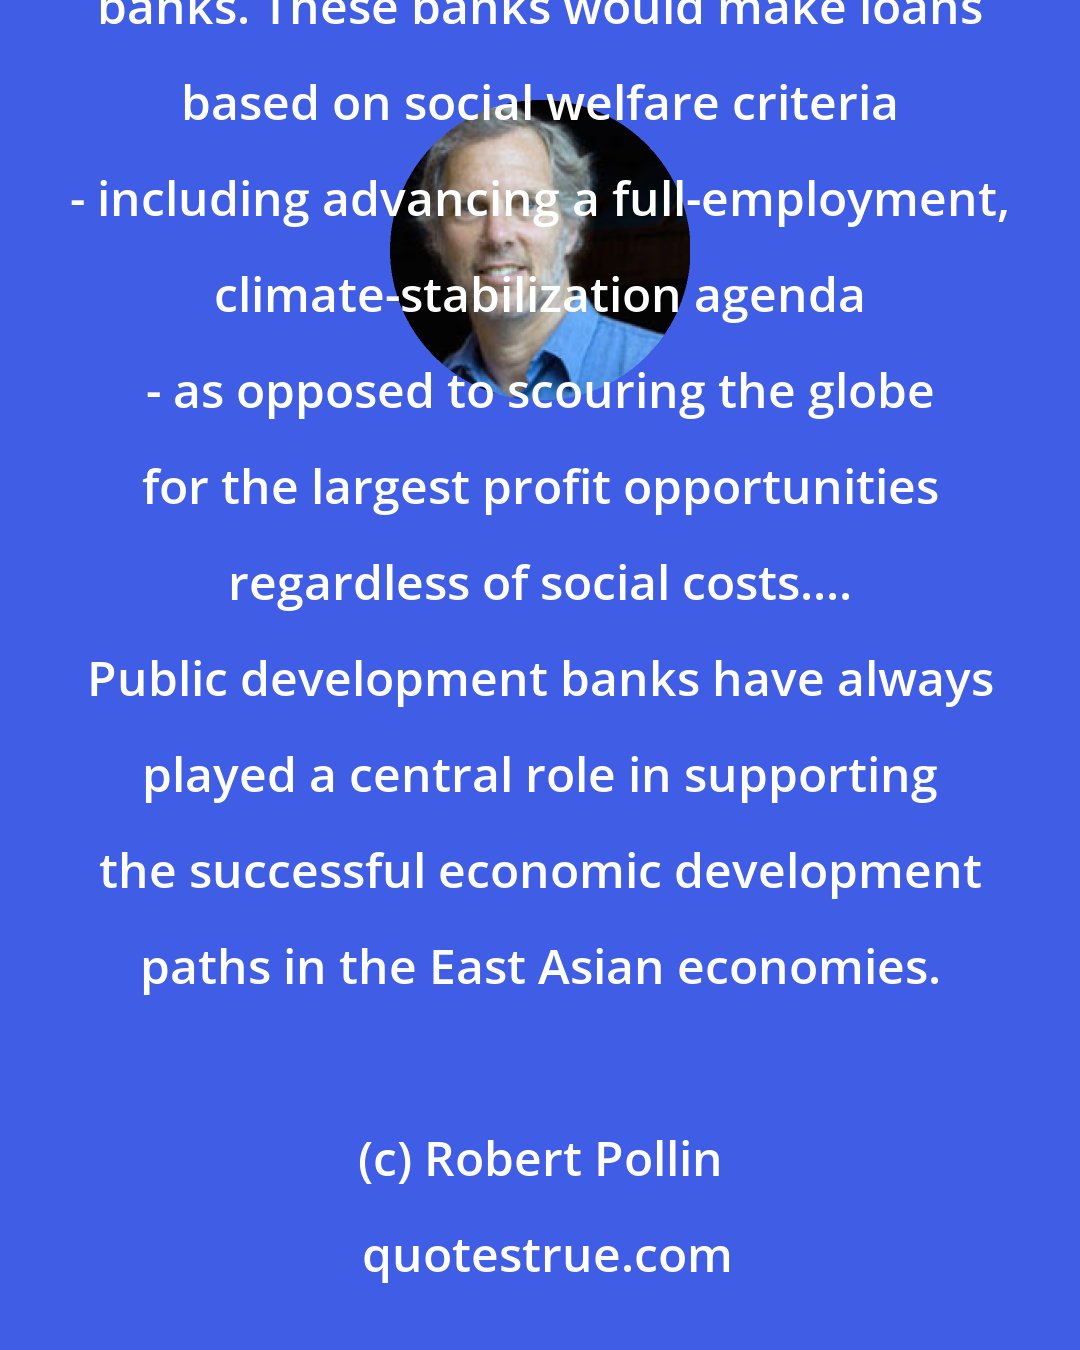 Robert Pollin: Both in the US and throughout the world, there needs to be a growing presence of public development banks. These banks would make loans based on social welfare criteria - including advancing a full-employment, climate-stabilization agenda - as opposed to scouring the globe for the largest profit opportunities regardless of social costs.... Public development banks have always played a central role in supporting the successful economic development paths in the East Asian economies.